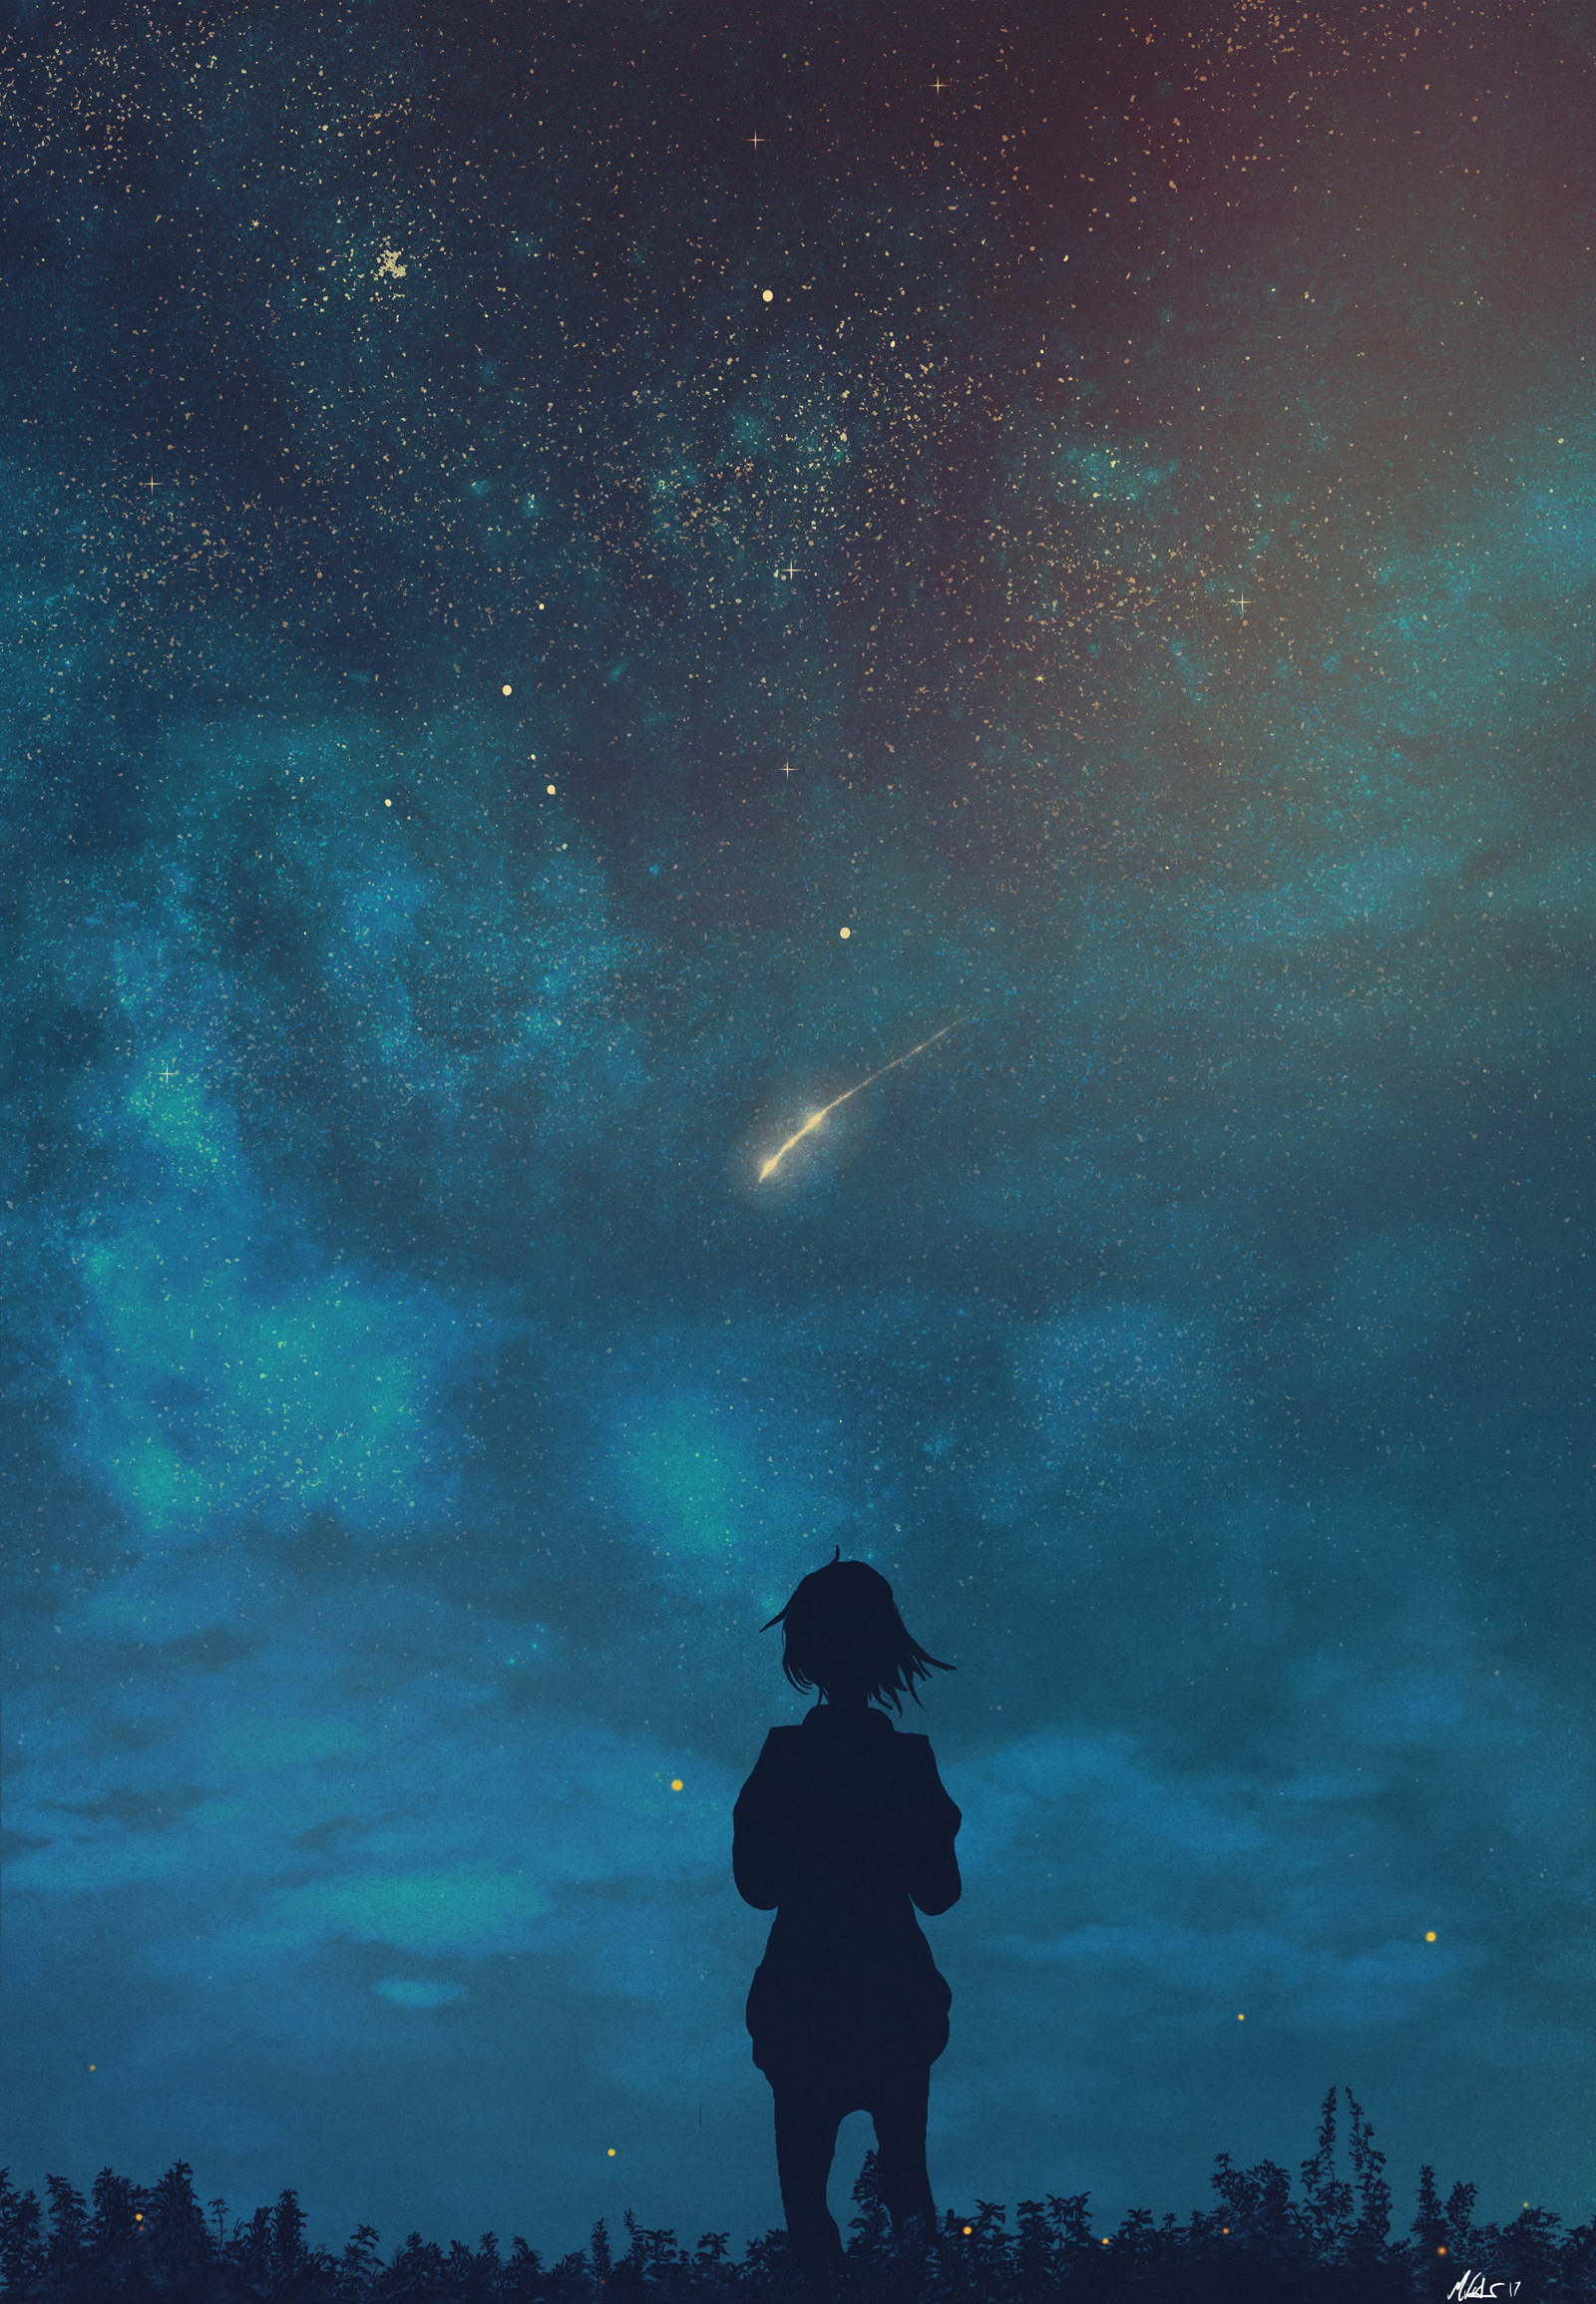 loneliness, dark, night, silhouette, starry sky, child wallpaper for mobile